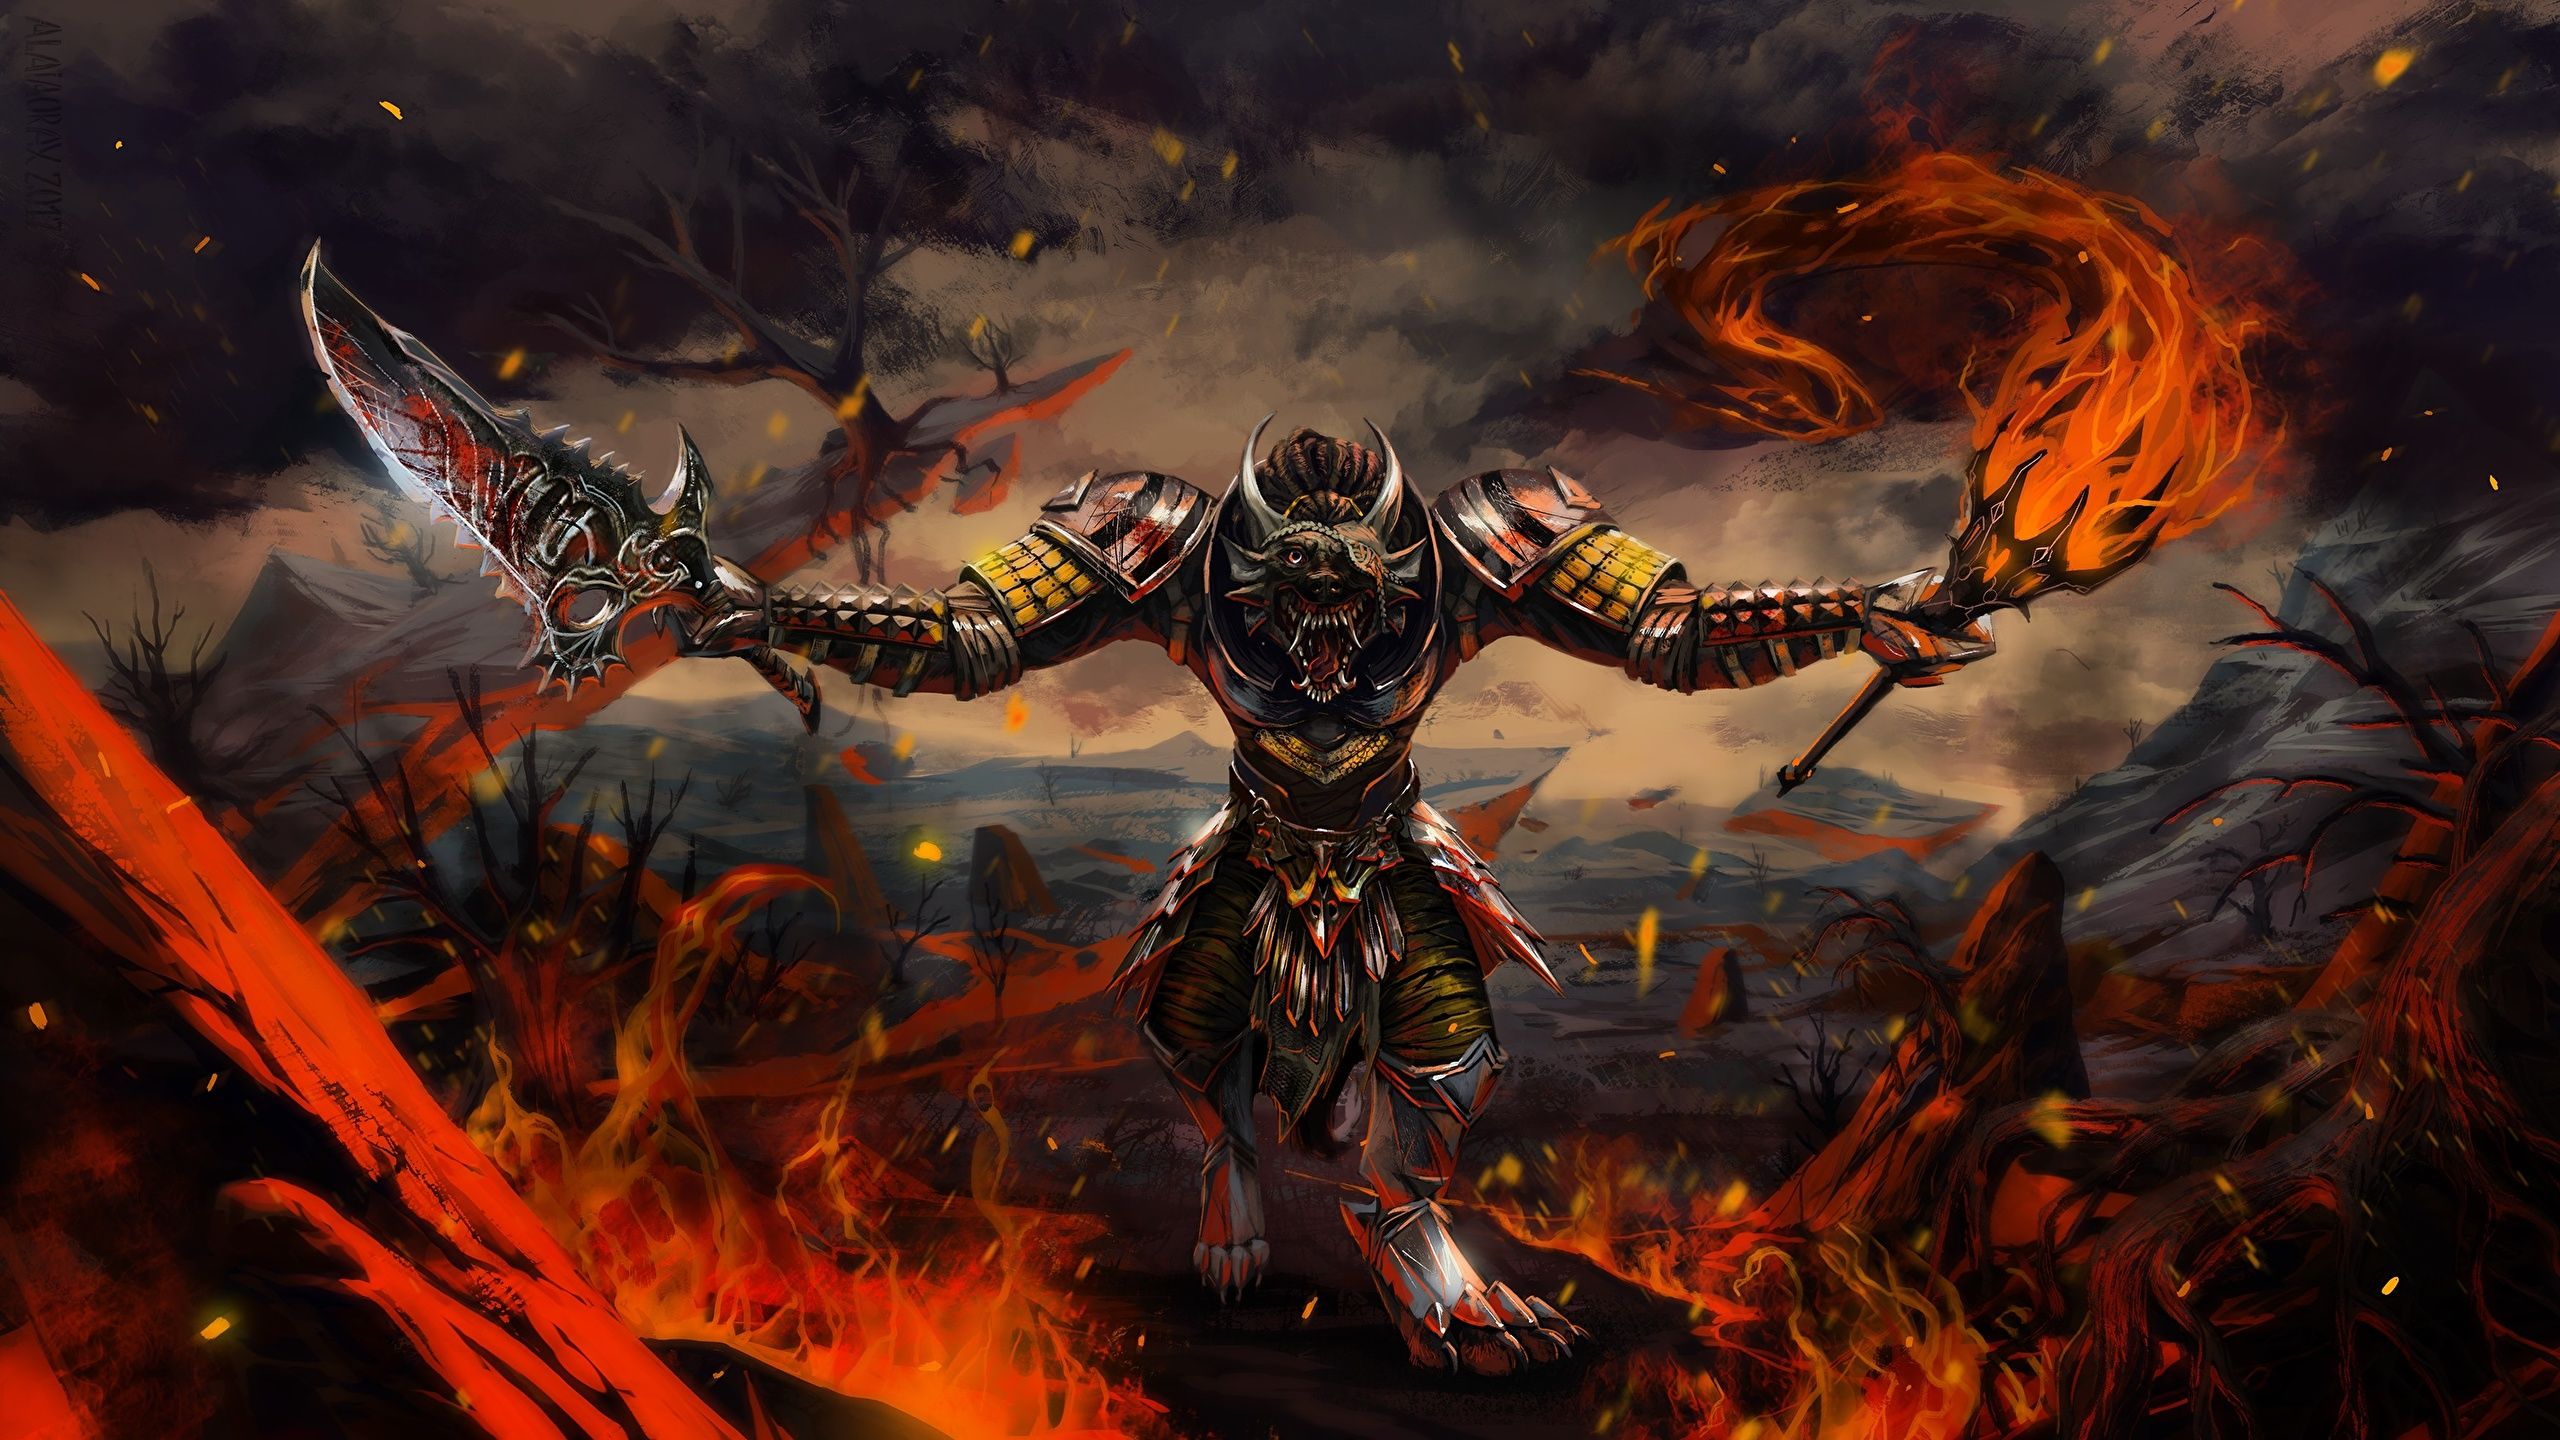 image armour Swords monster Fantasy Roar flame Torch 2560x1440